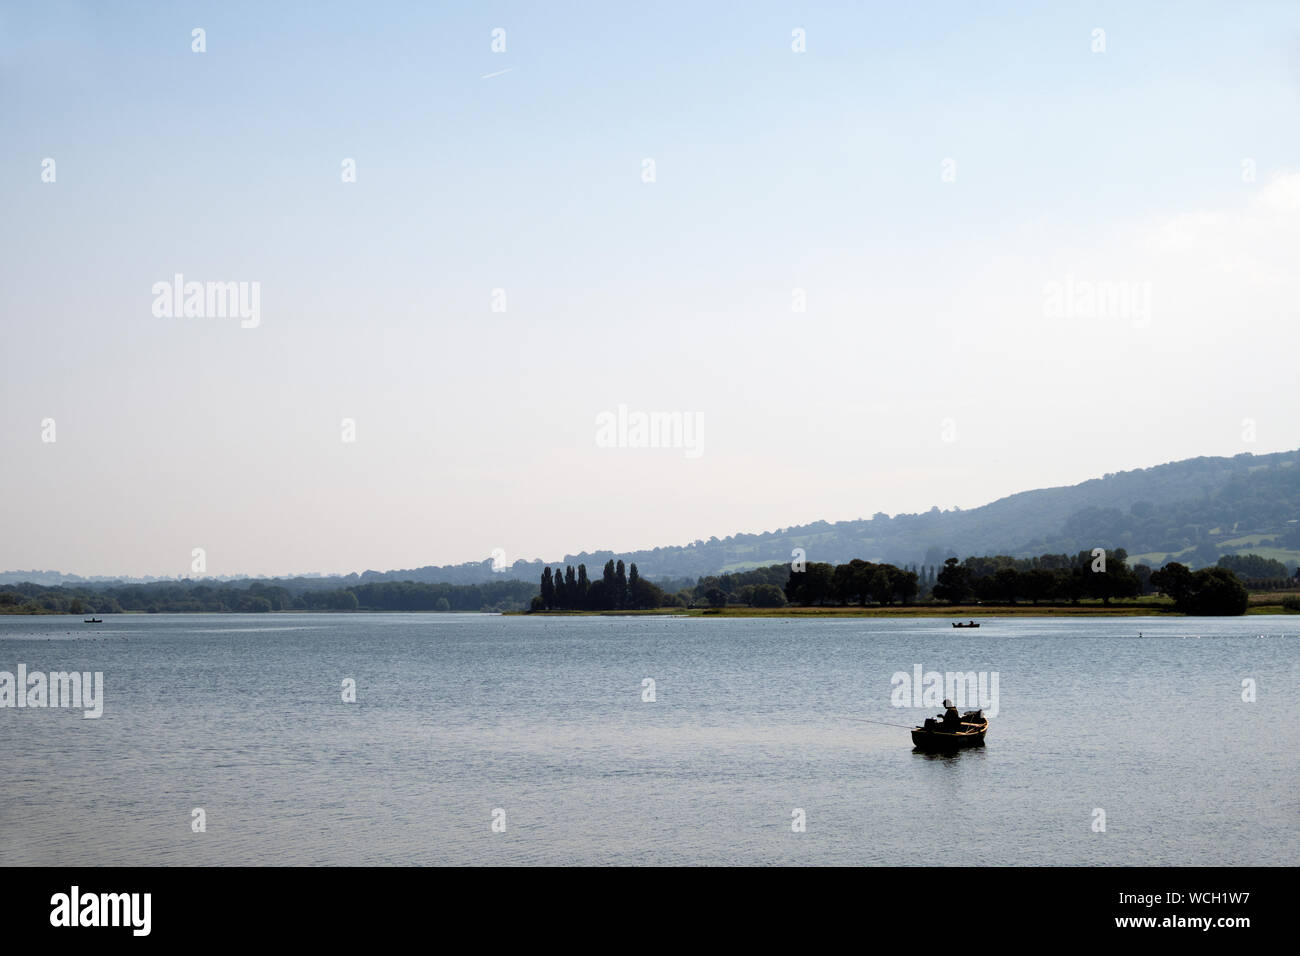 Fisherman in boat on Blagdon lake Somerset in England Stock Photo